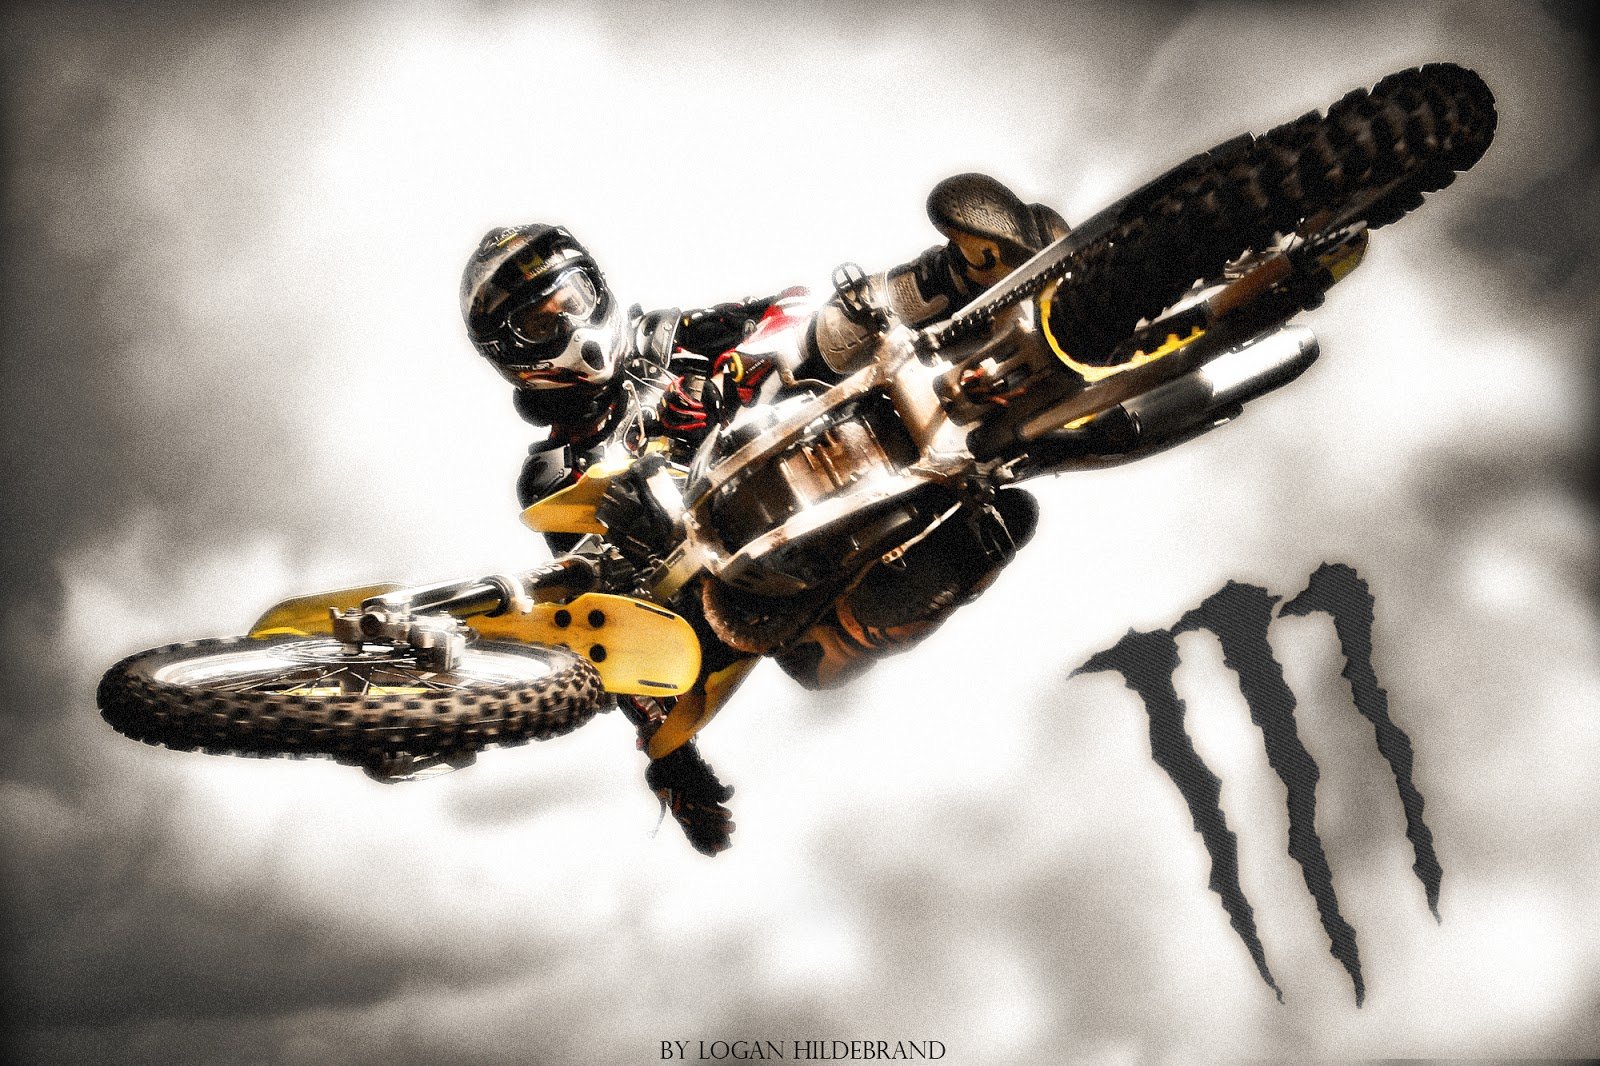 Dirt Bike WallpaperAmazoncomAppstore for Android